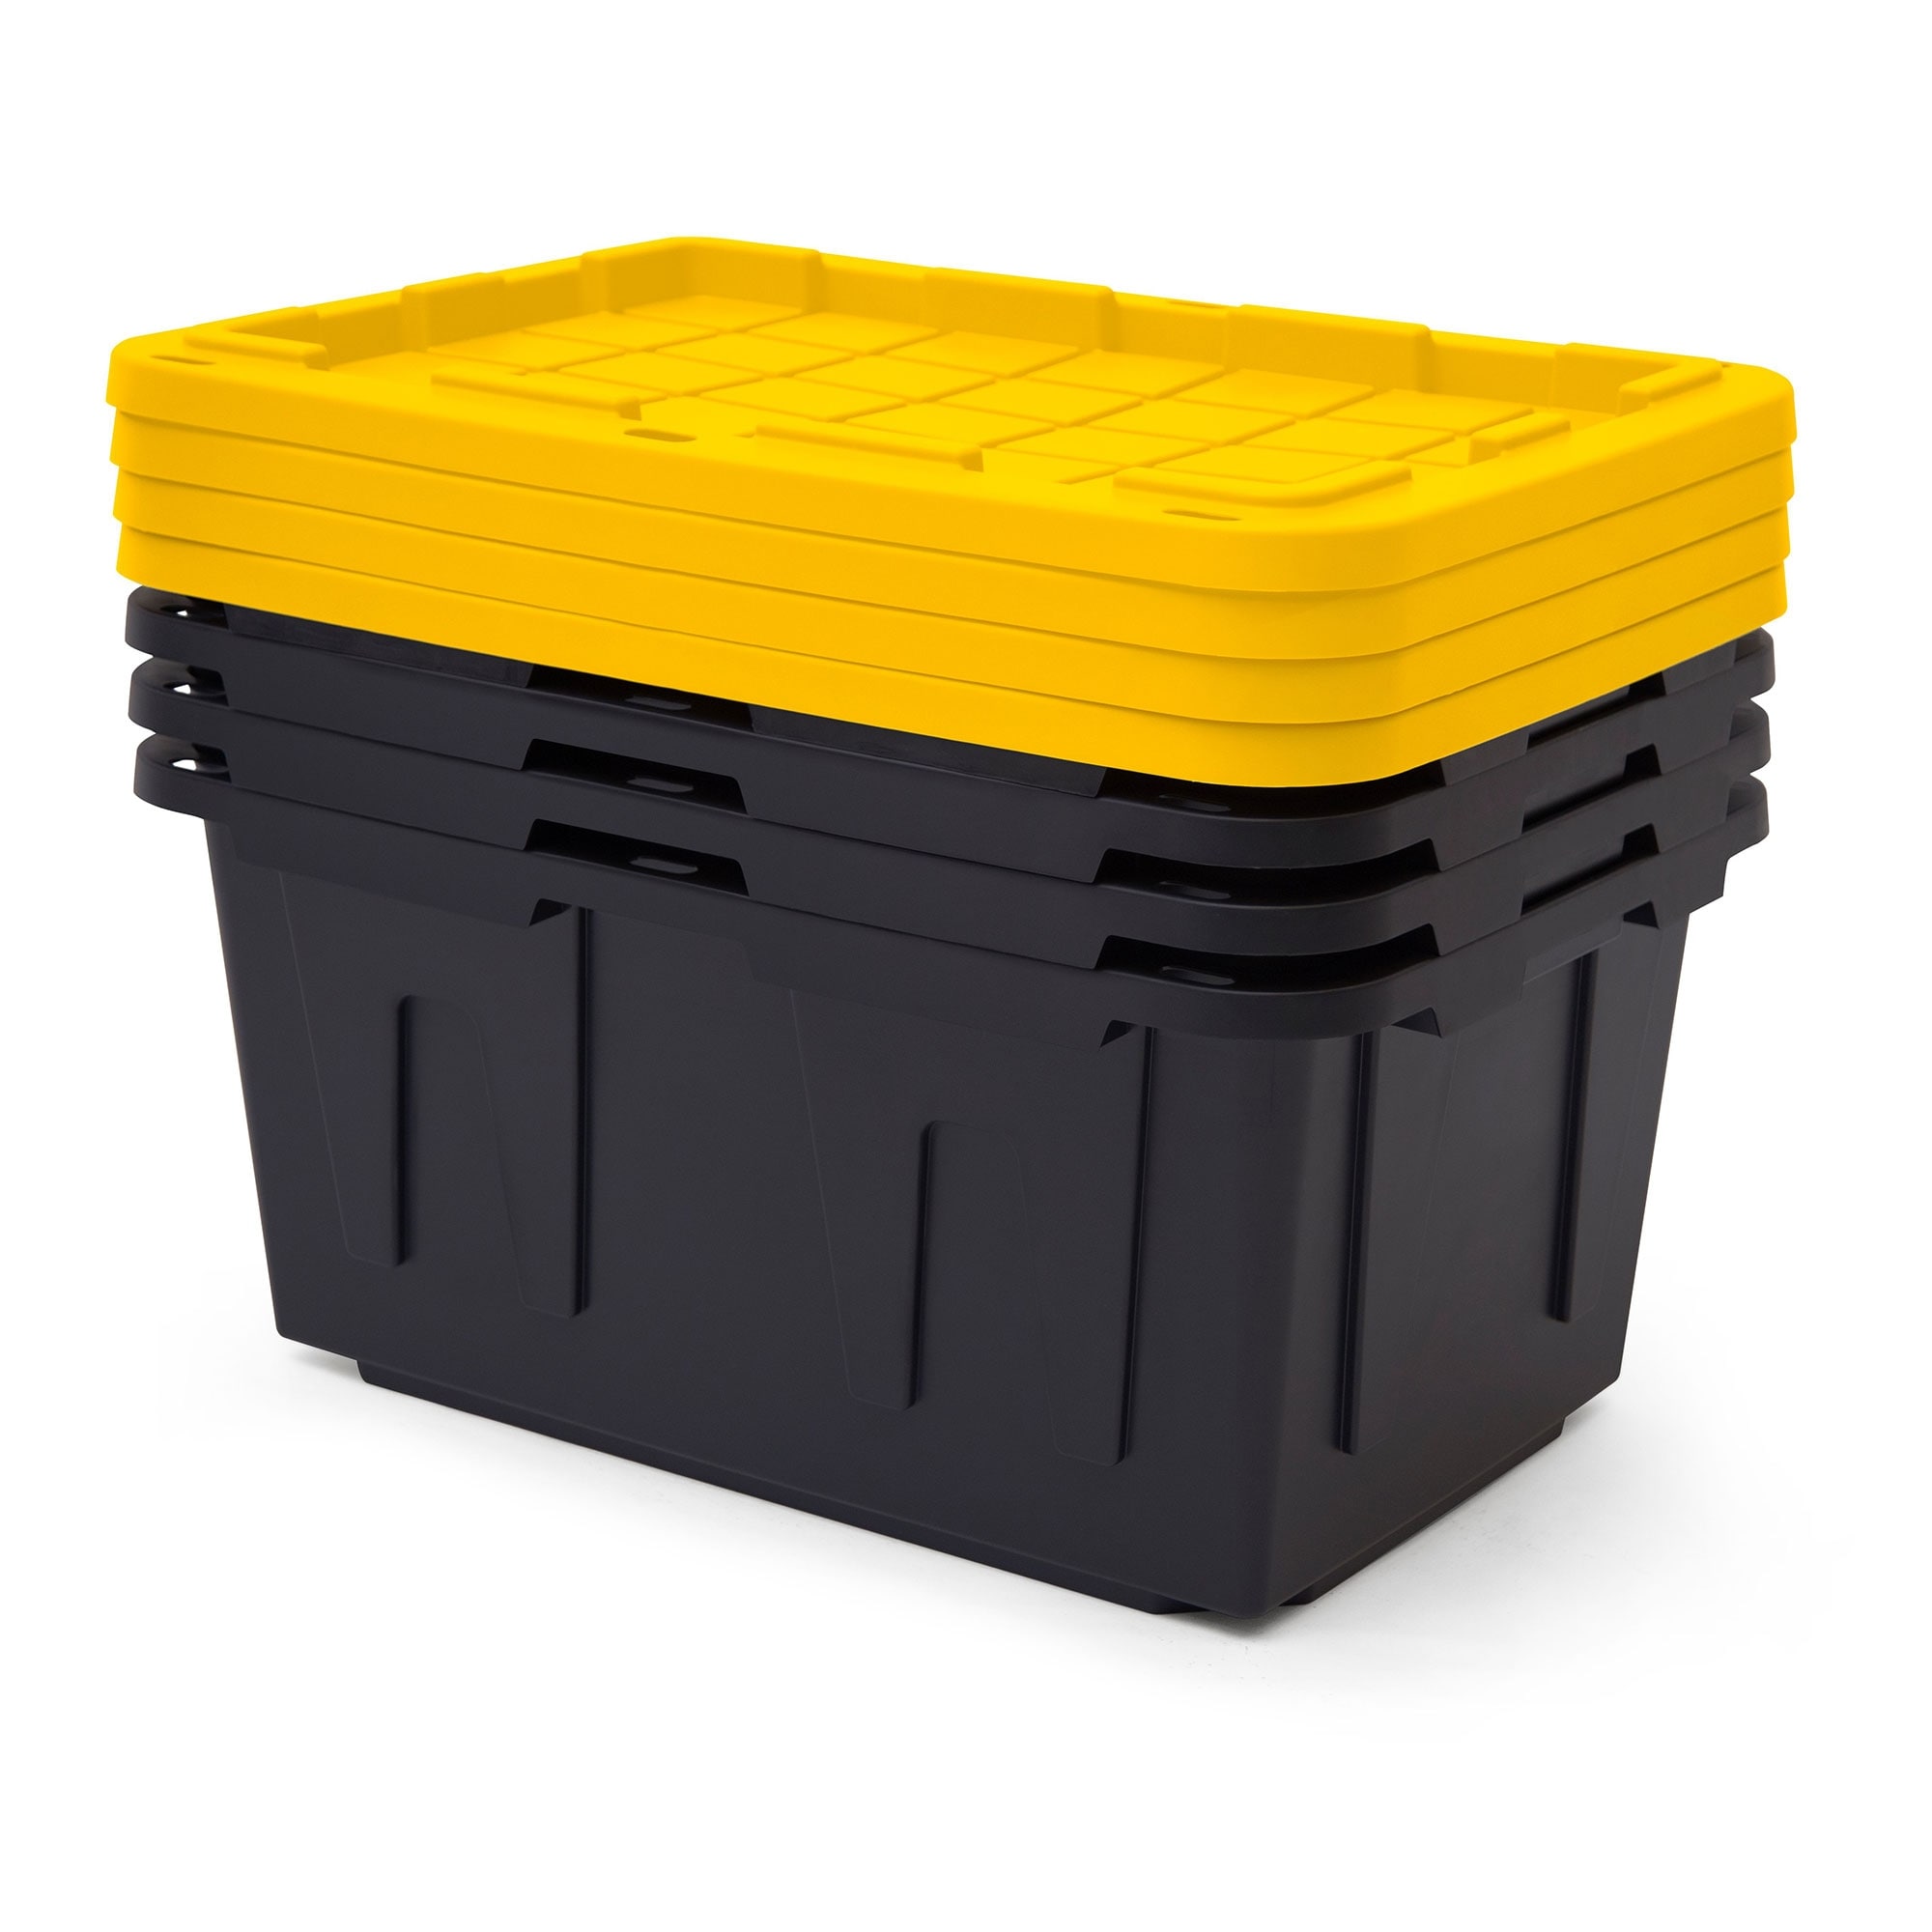 GREENMADE Extra Strong 27 Gallon Plastic Storage Bin, Multi Color, 4 Pack.  Heavy Duty Built With Snap Fit Lid. Factory Direct (Blue & Yellow)